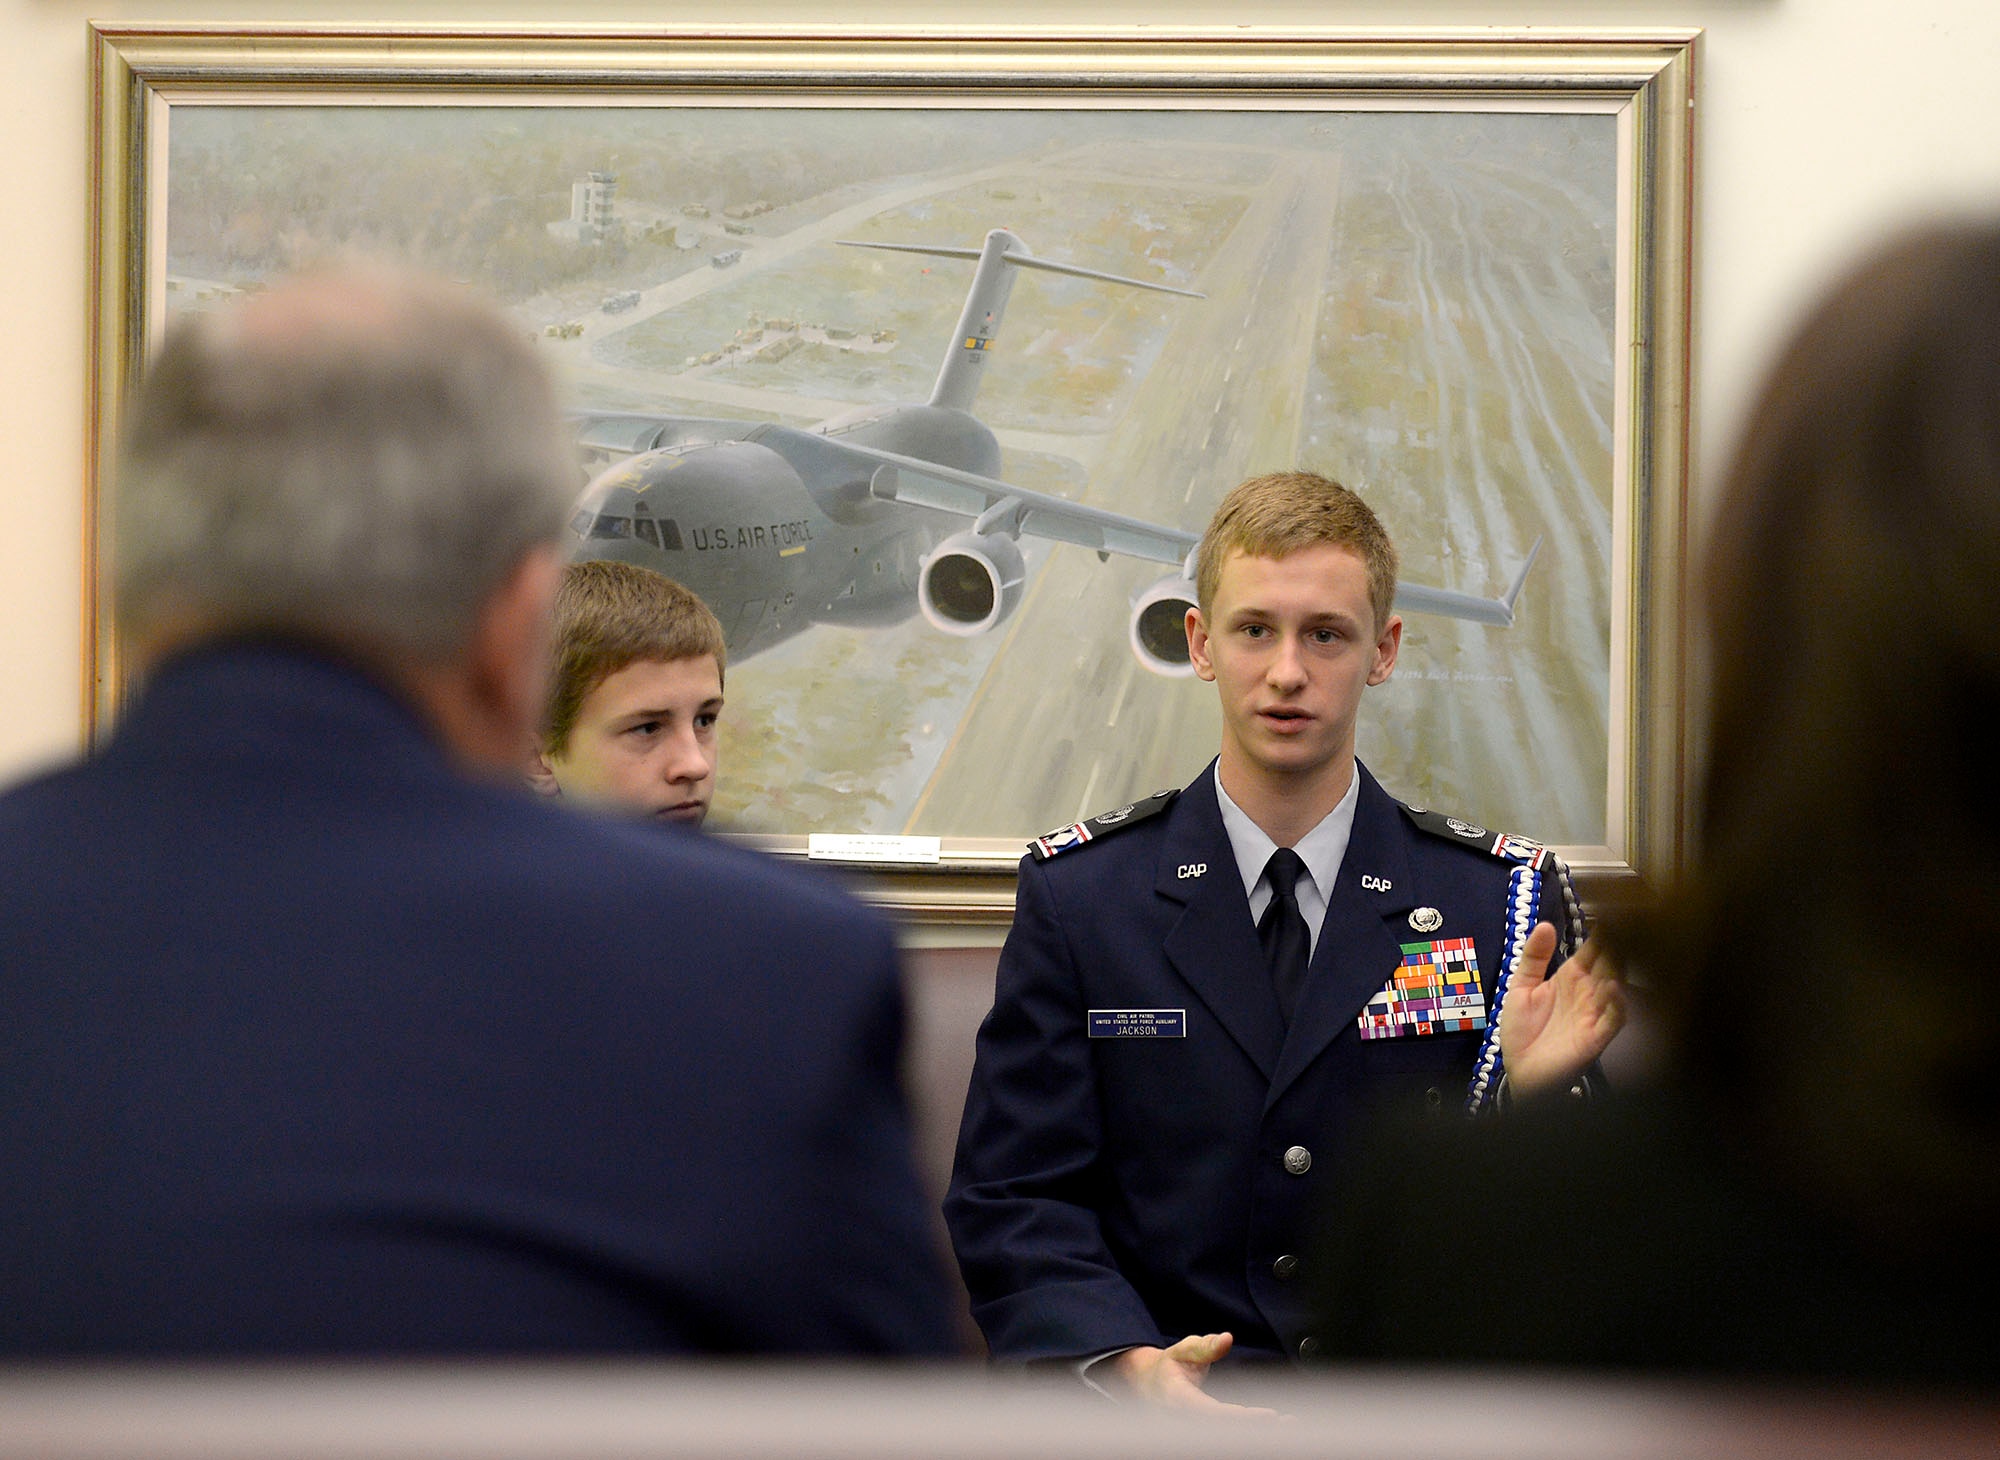 Civil Air Patrol Cadet Matthew C. Jackson tells Air Force Chief of Staff Gen. Mark A. Welsh III and his wife, Betty, about his desire to fly aircraft during a visit where he was presented the General Carl A. Spaatz Award in the Pentagon, Nov. 9, 2015. Jackson is the 2,000th recipient of this award, and he serves in the Twin Pine Composite Squadron of the New Jersey Wing, Civil Air Patrol, in West Trenton, N.J.  (U.S. Air Force photo/Scott M. Ash)